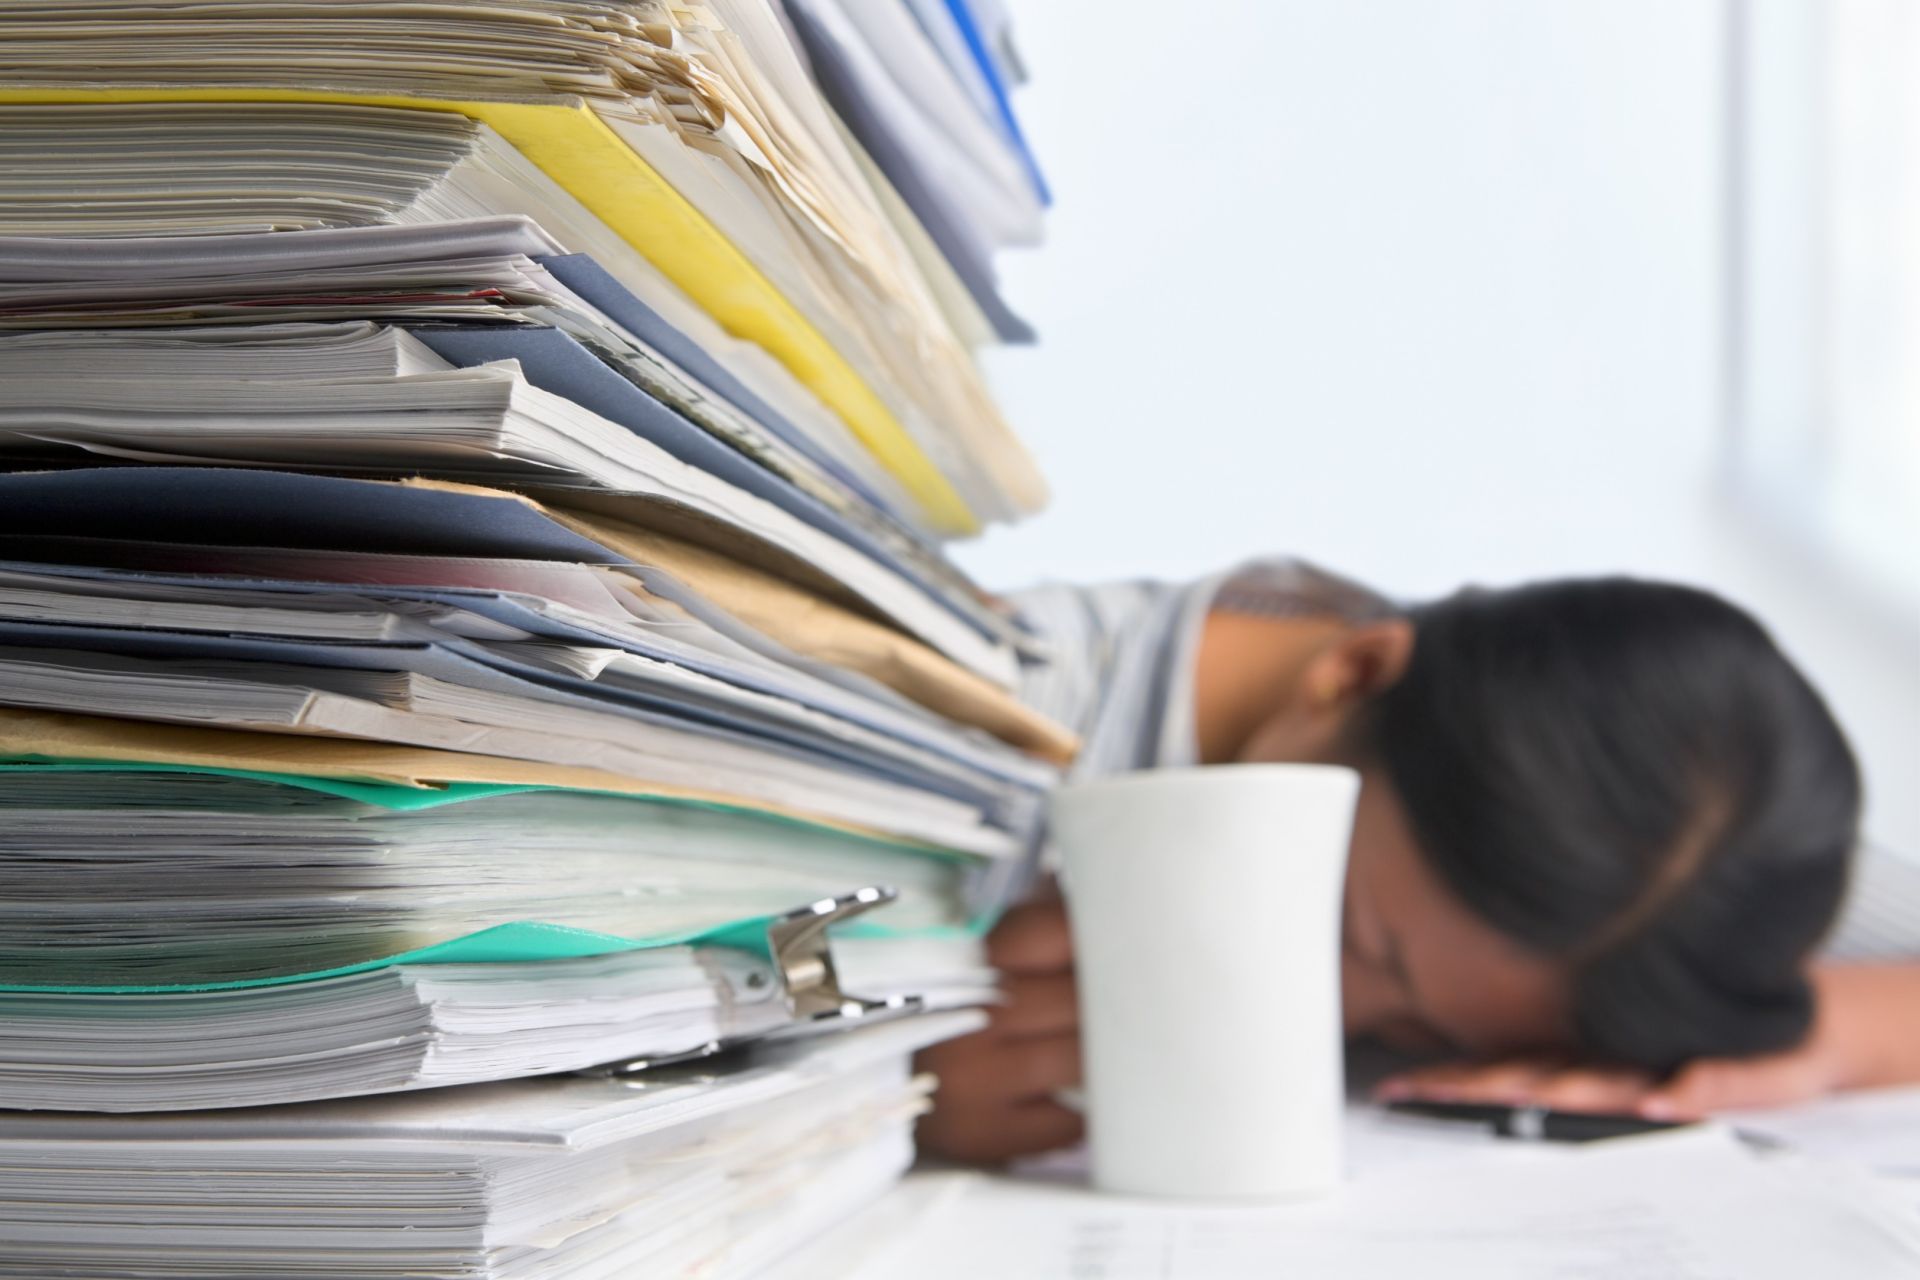 Buisness man alseep on his desk which has piled up work on it.